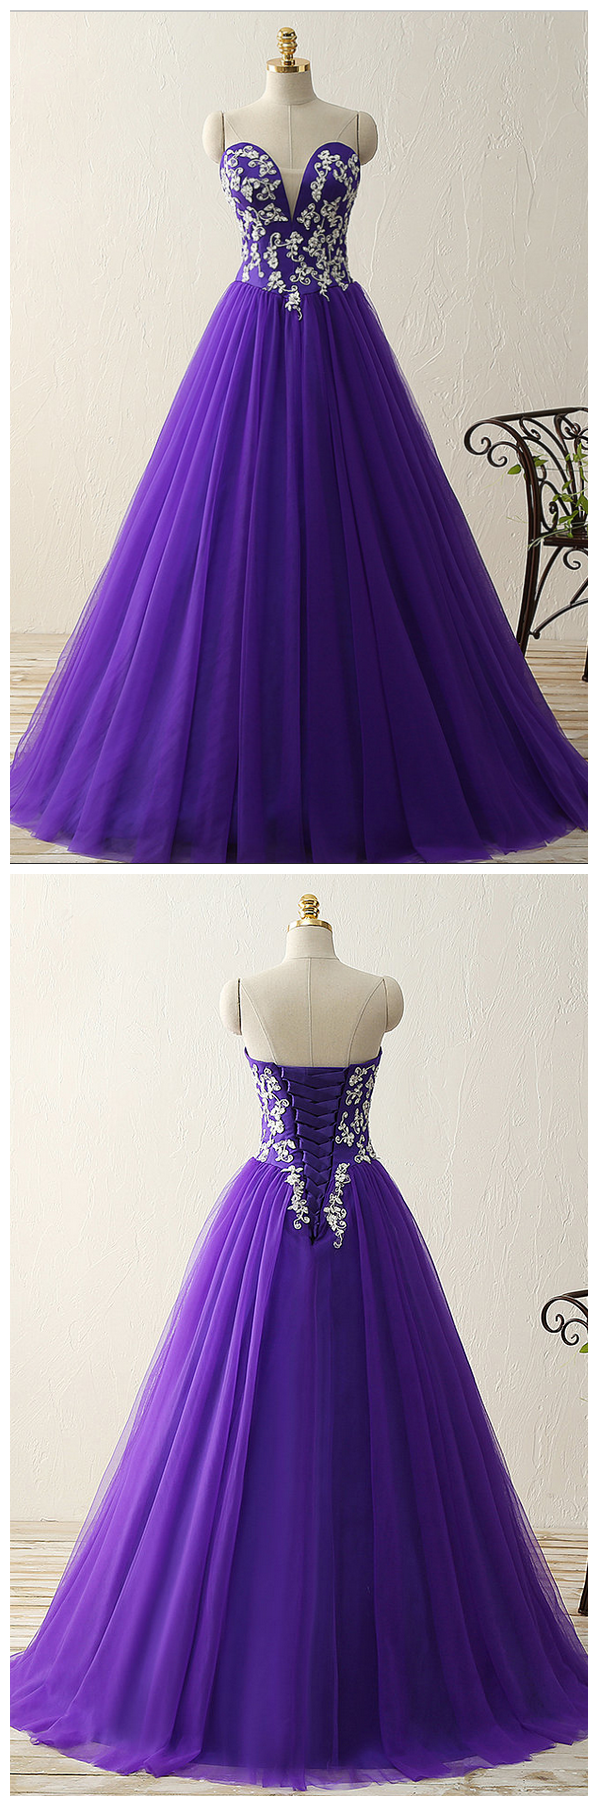 Charming Prom Dress, Sweetheart Crystal Beads Satin Tulle Floor Length Ball Gown Vintage Dress